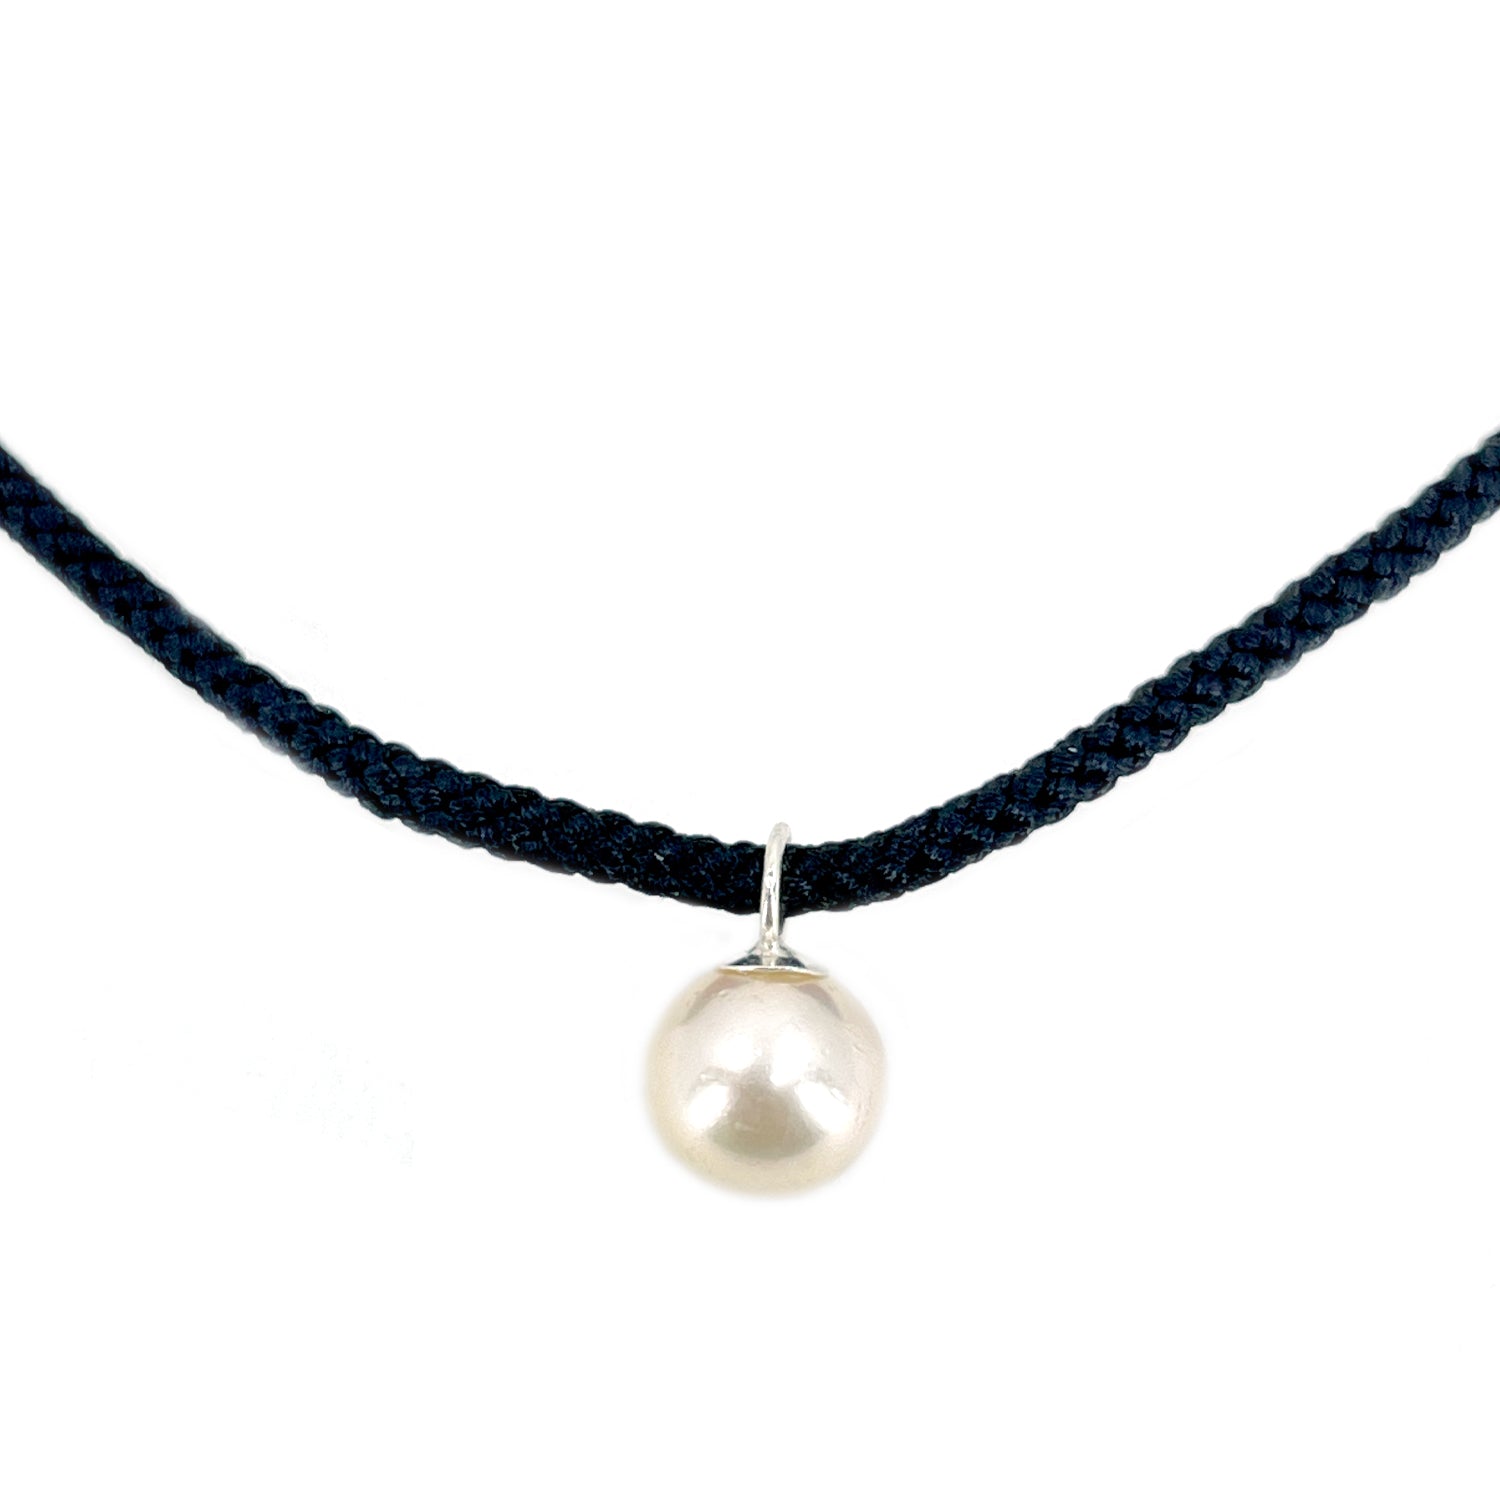 Kumihimo Braided Black Silk Vintage Akoya Saltwater Cultured Pearl Necklace-Sterling Silver